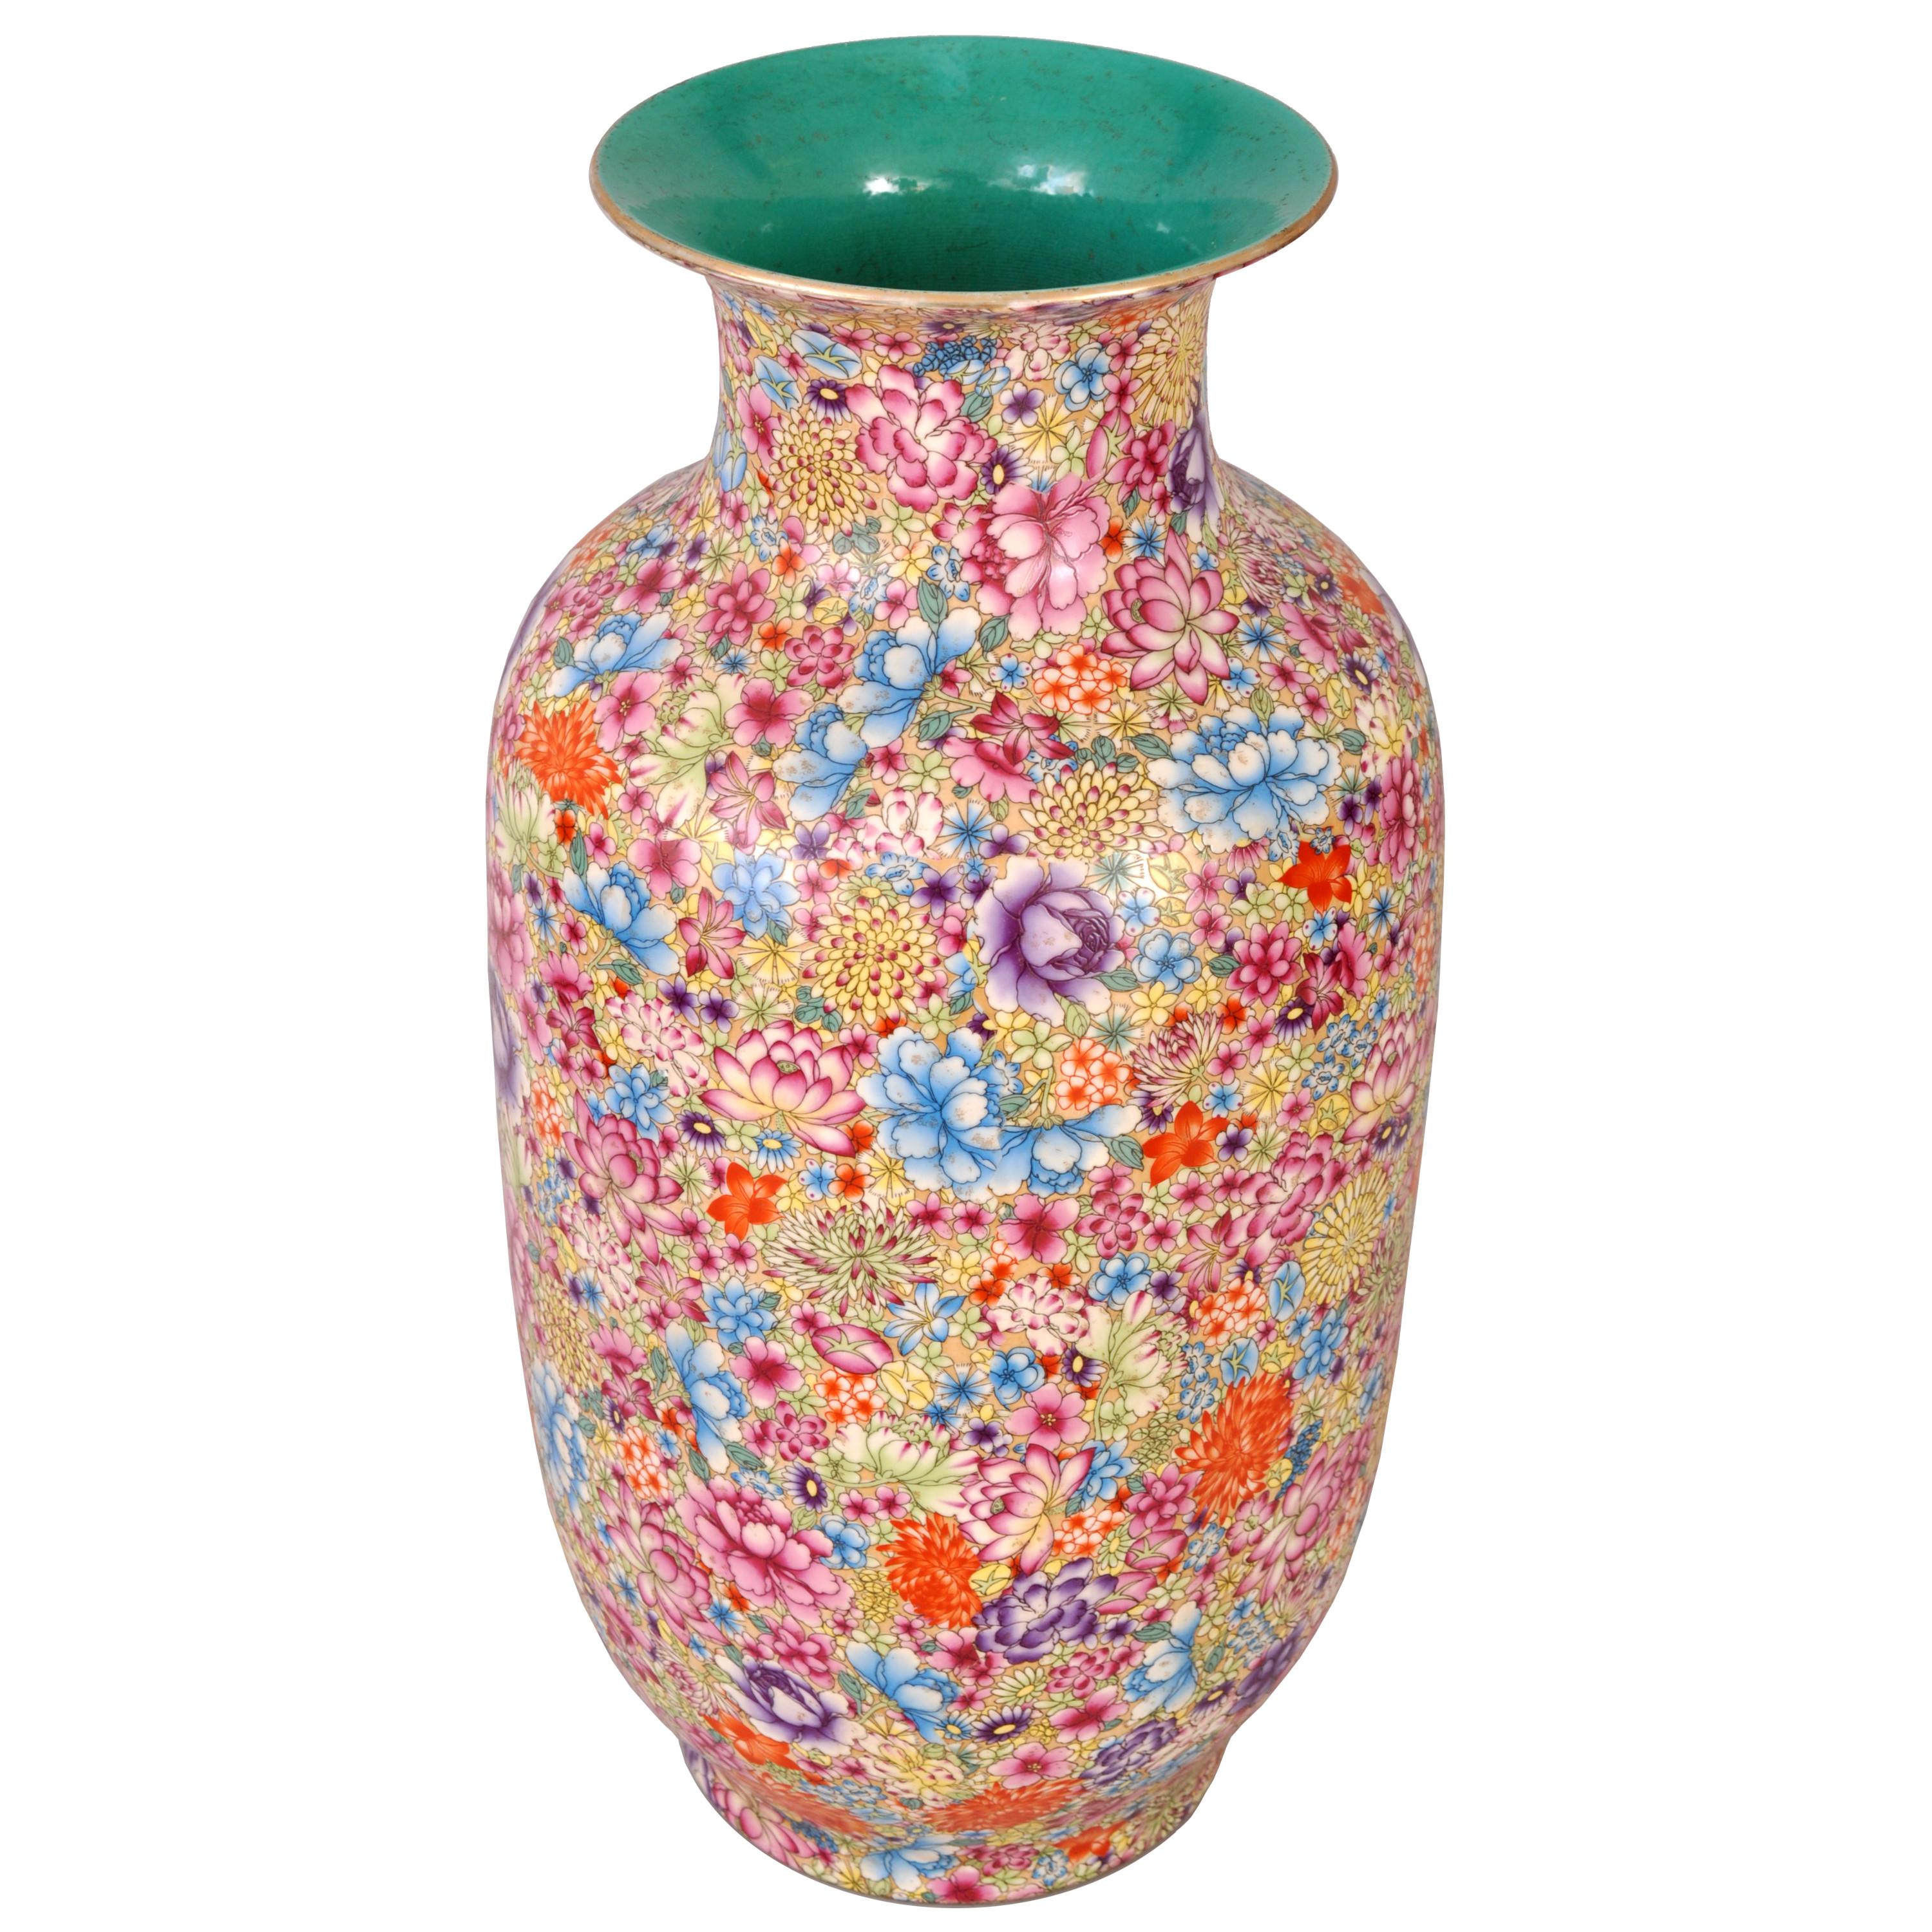 Hand-Painted Monumental Antique Chinese Porcelain Qing Dynasty Thousand Flowers Vase, 1900